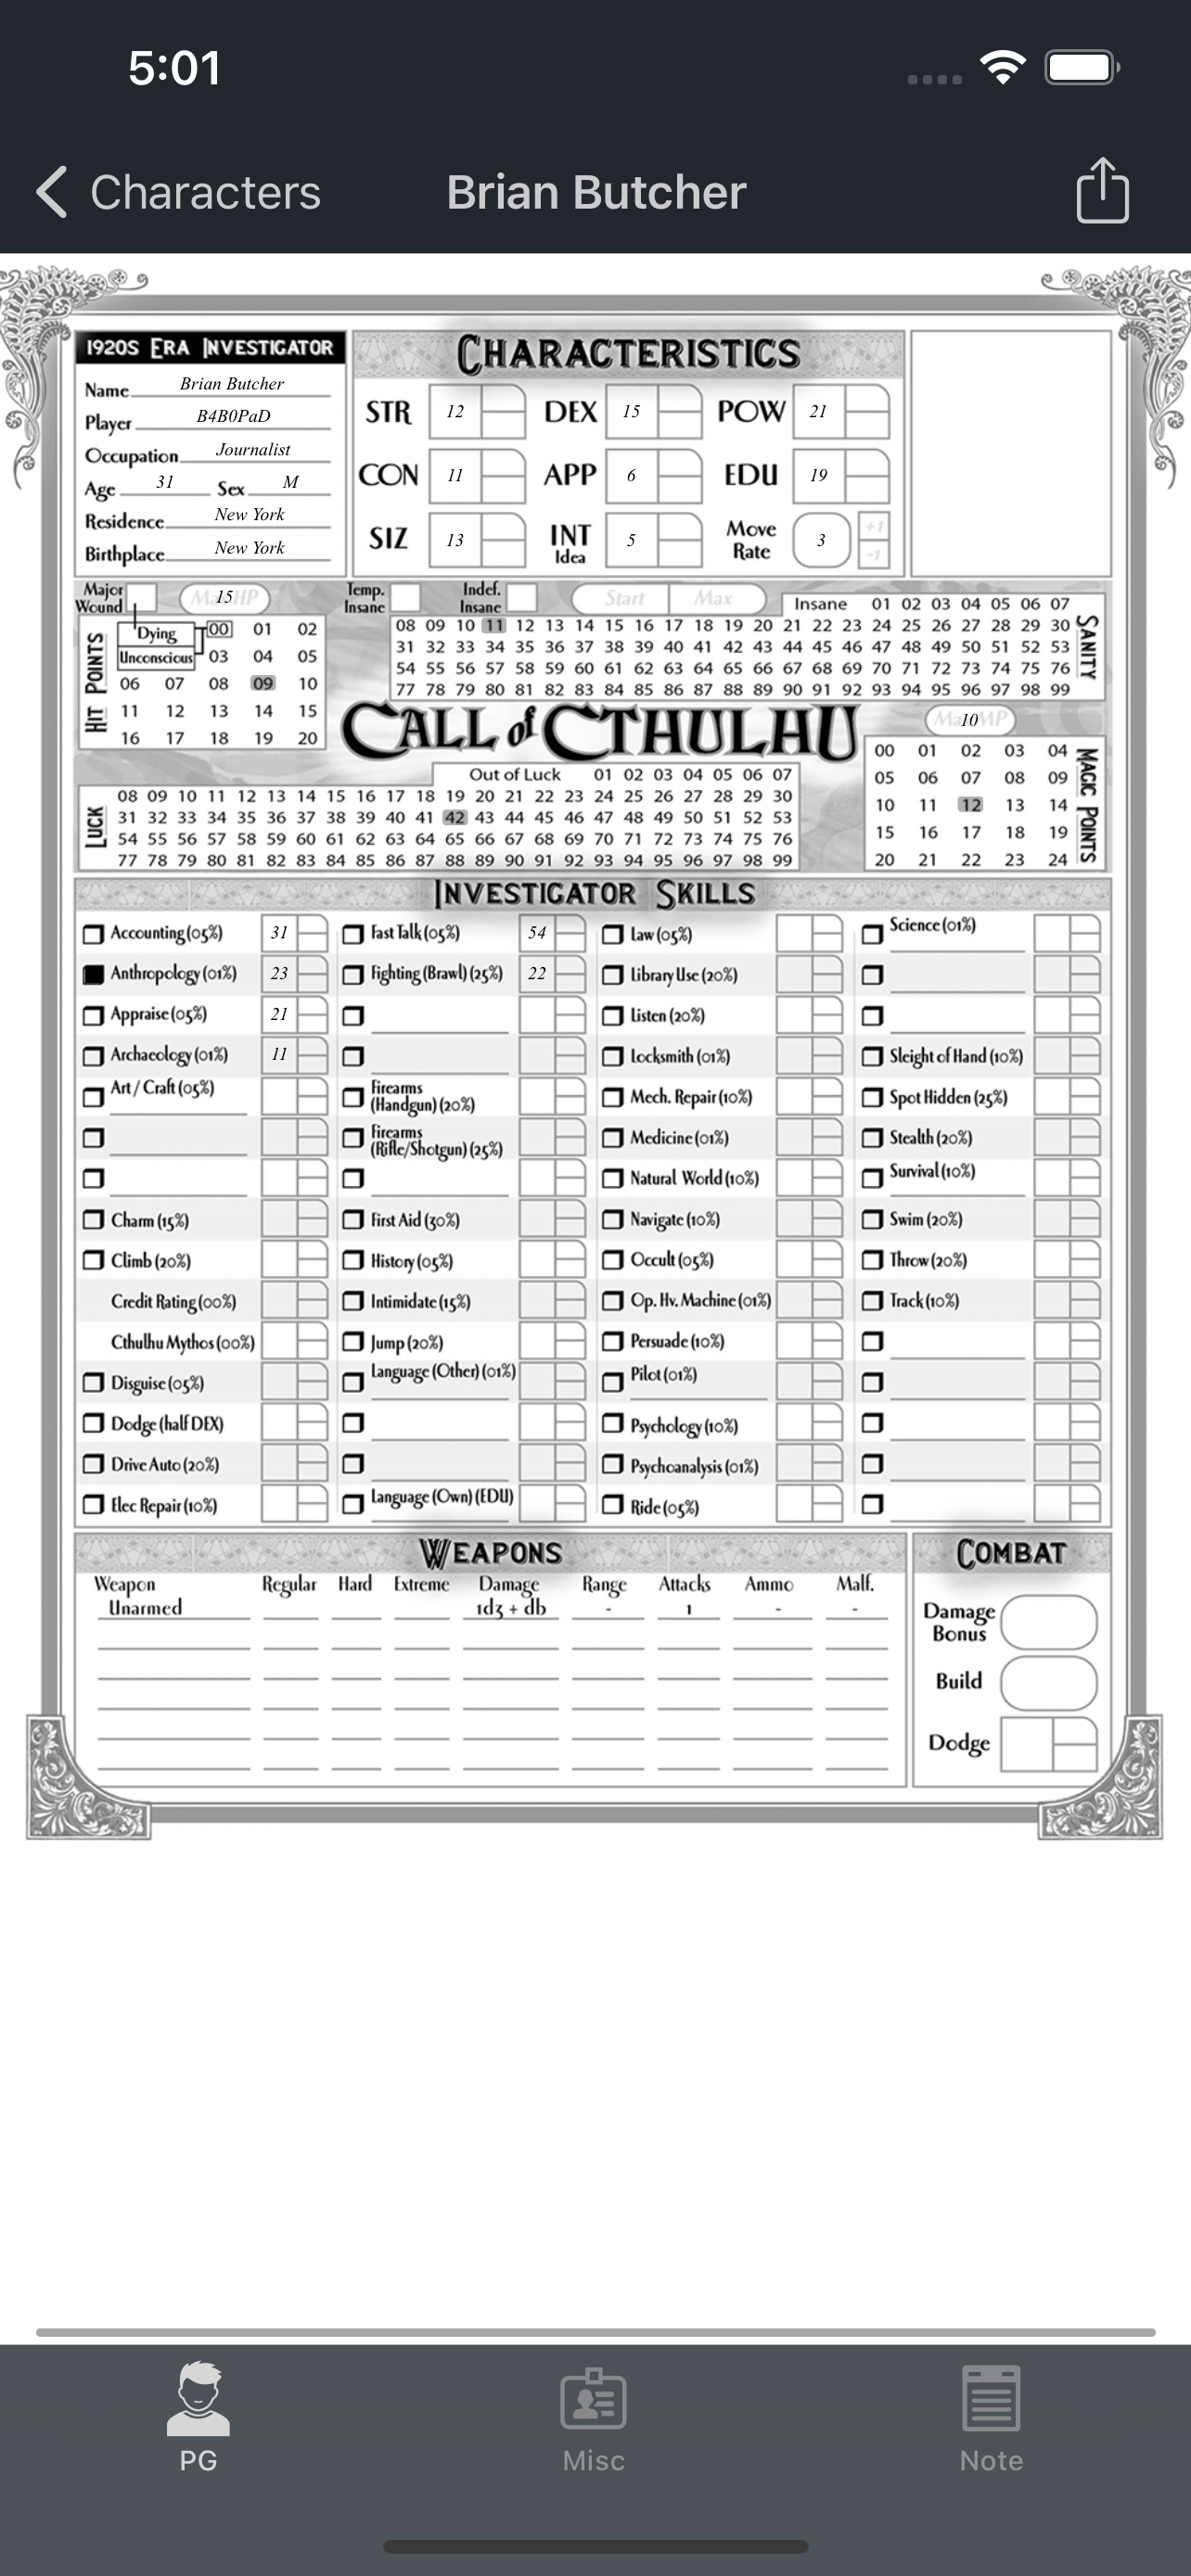 Call of cthulhu 7th character sheet - promosnom